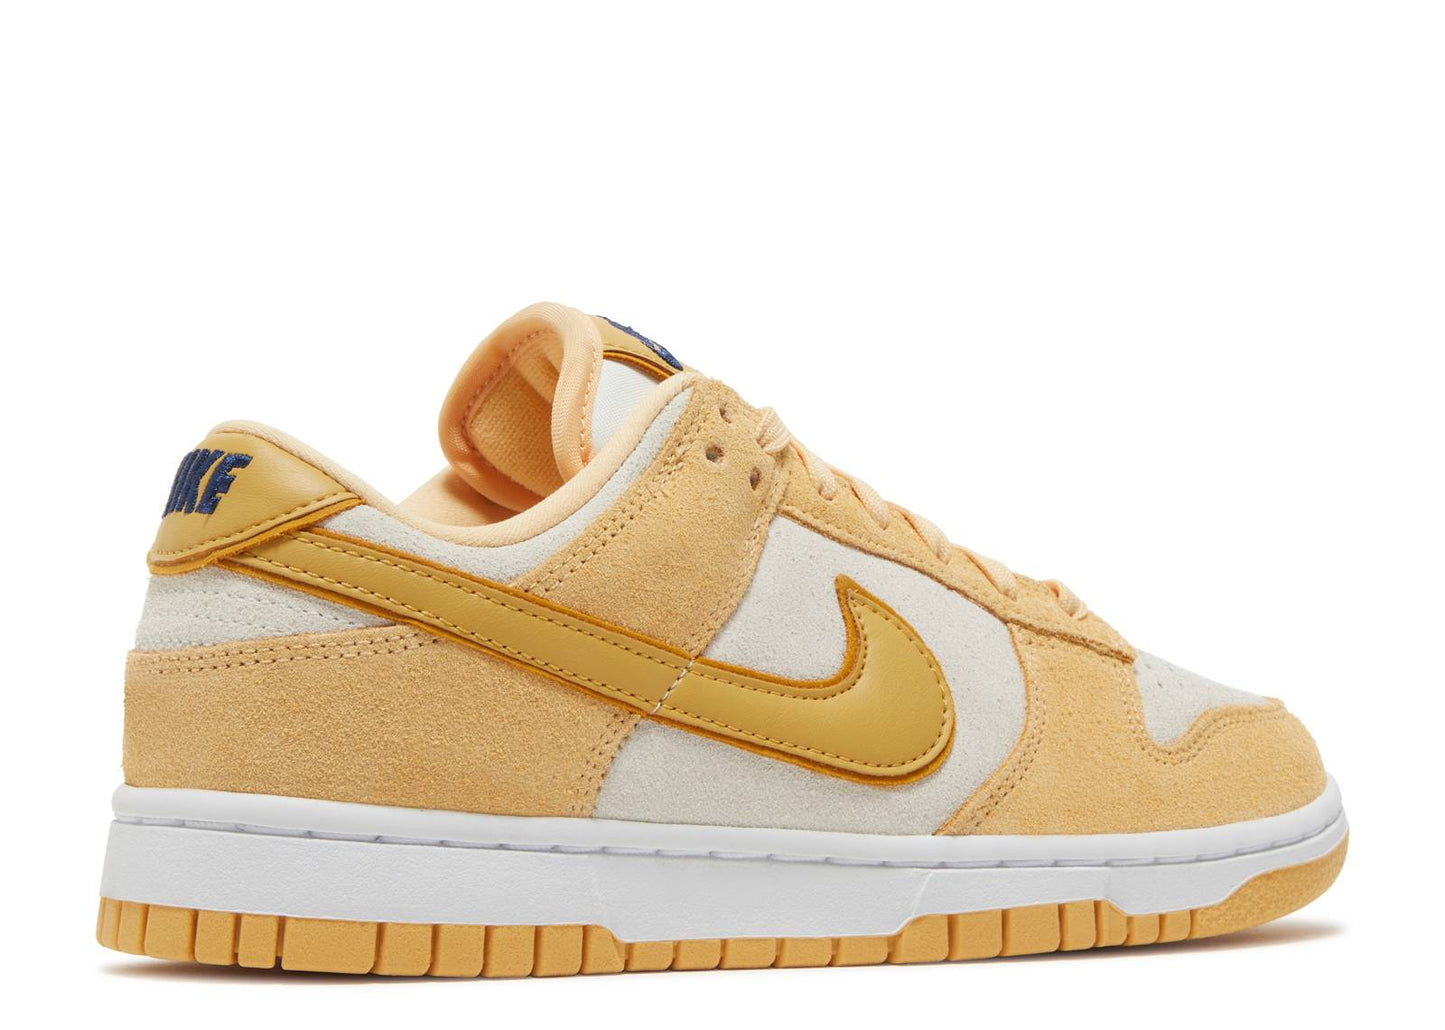 Nike Dunk Low LX WMNS "Celestial Gold Suede"